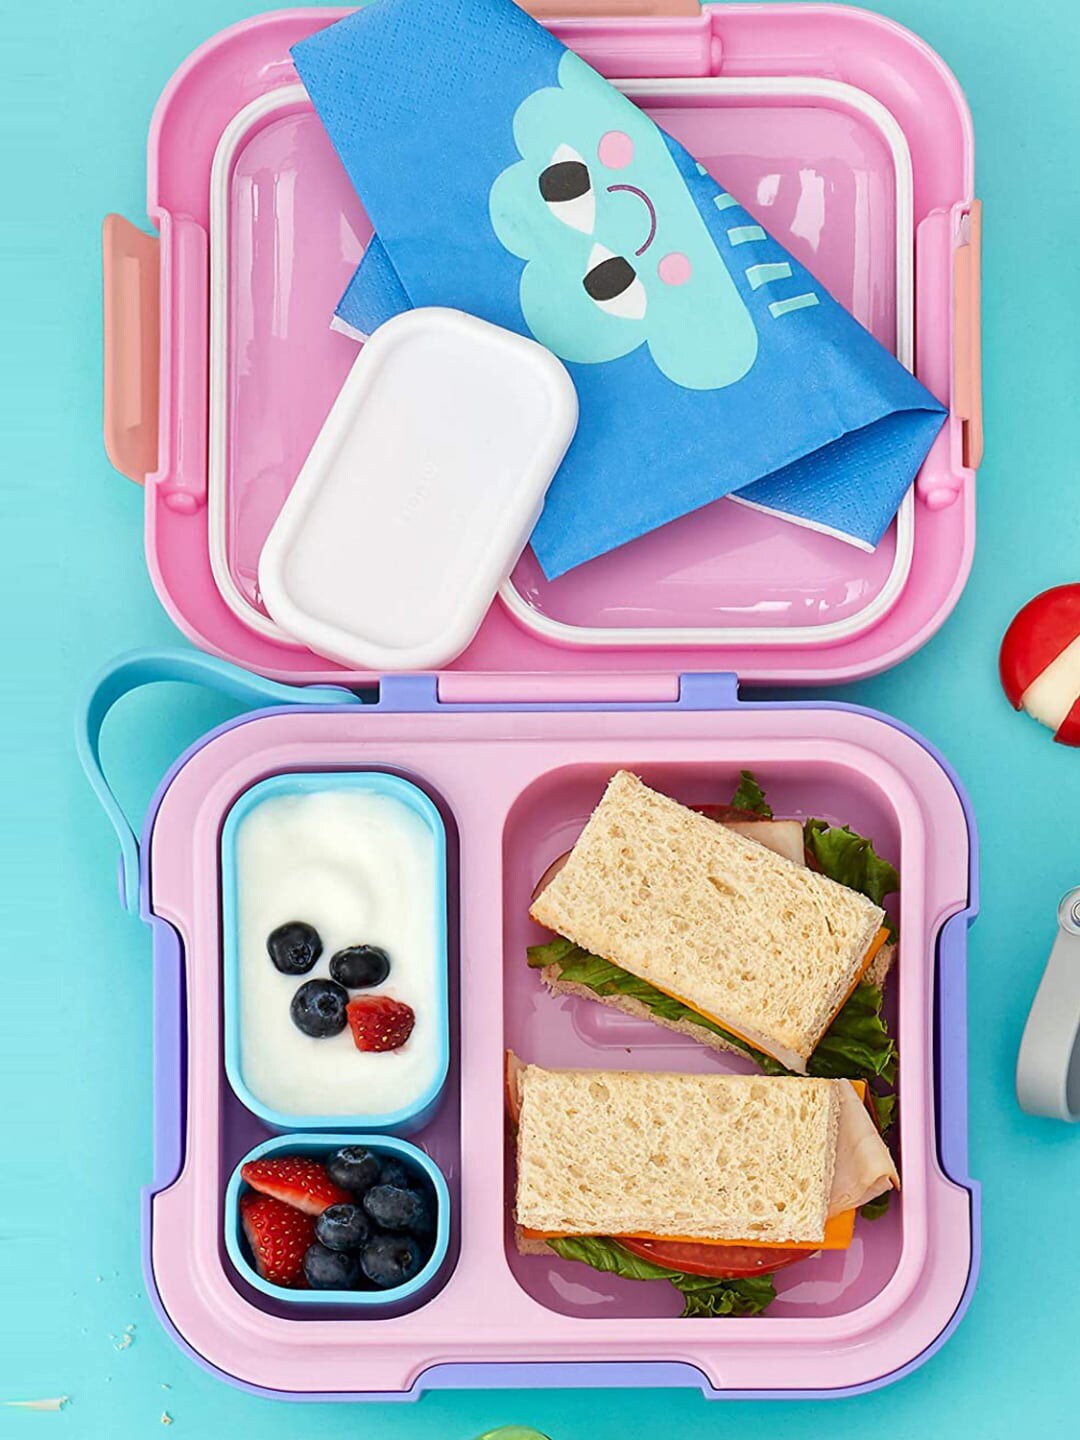 ZOKU Blue Lunch Box Price in India